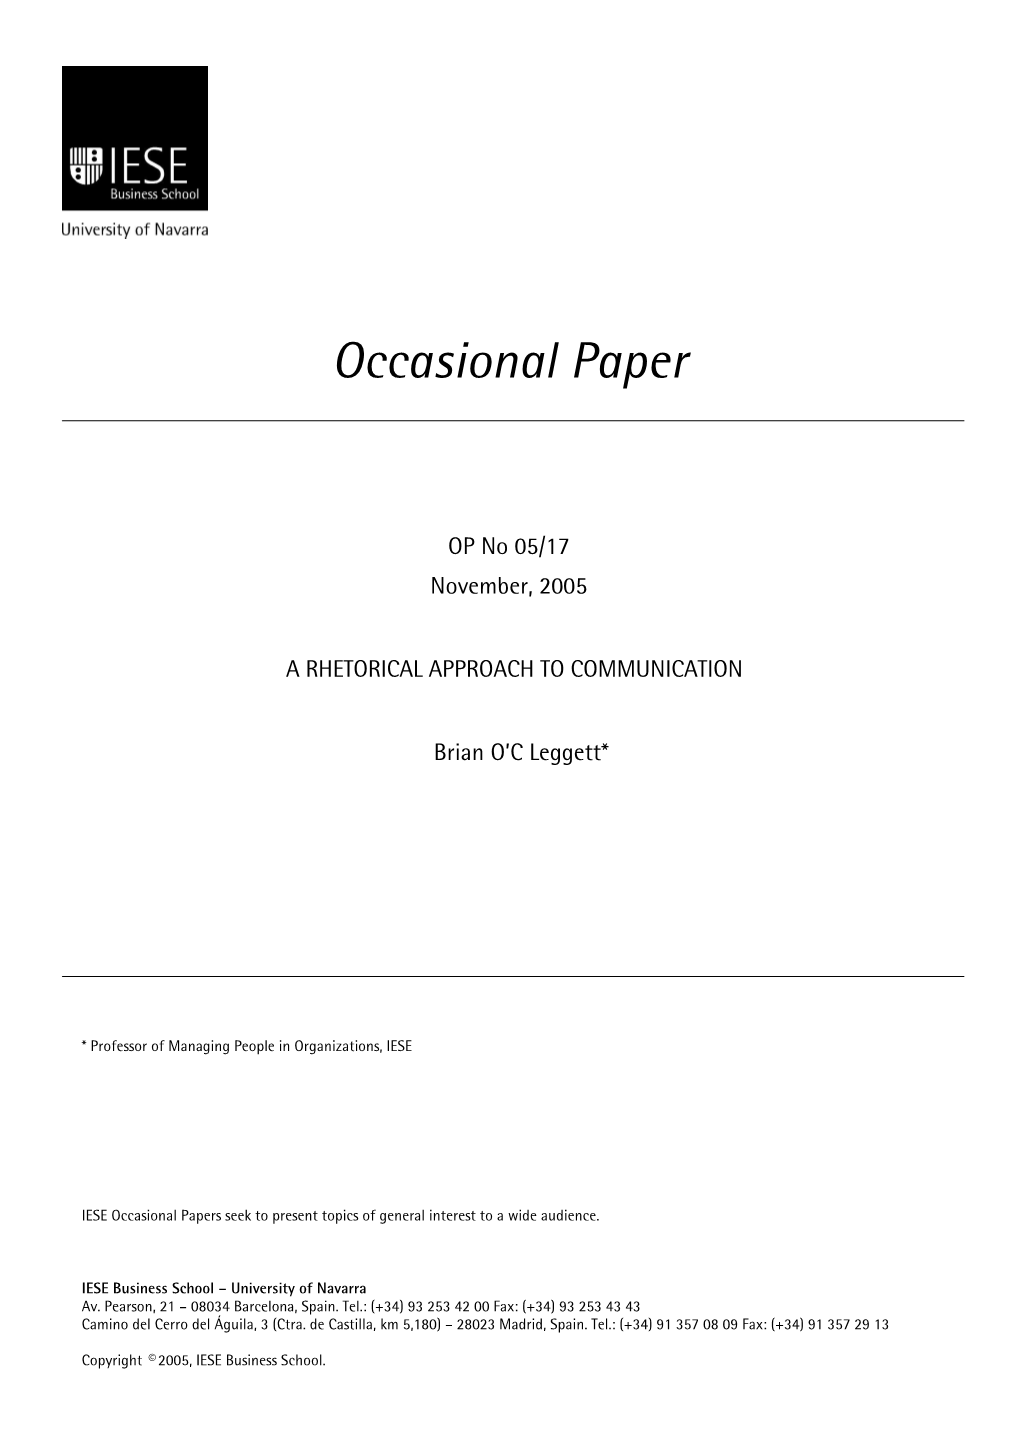 Occasional Paper